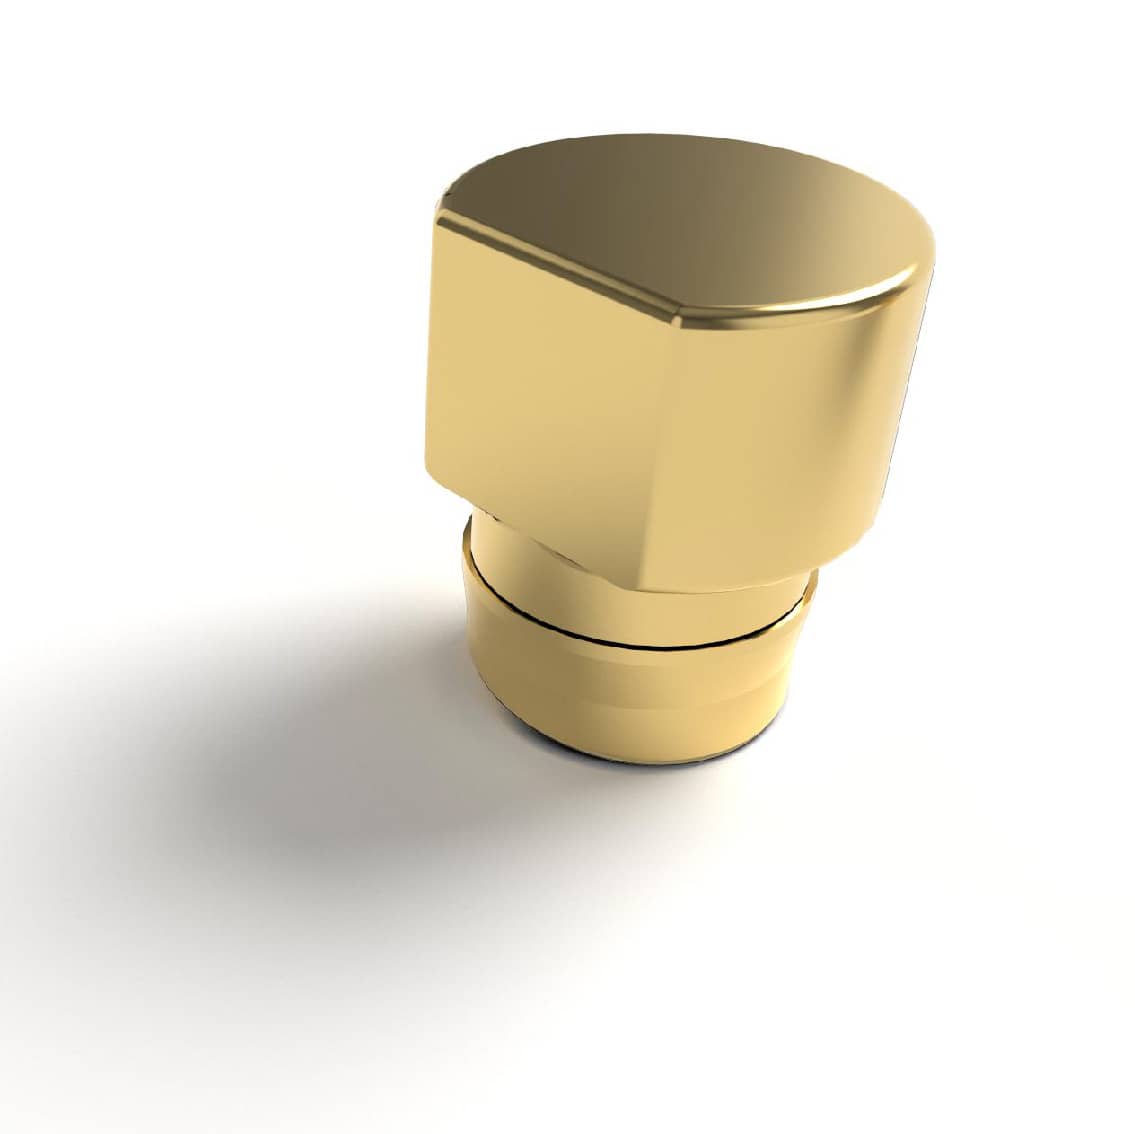 Female Machining Pin with Gold Landing Pad 3d Render